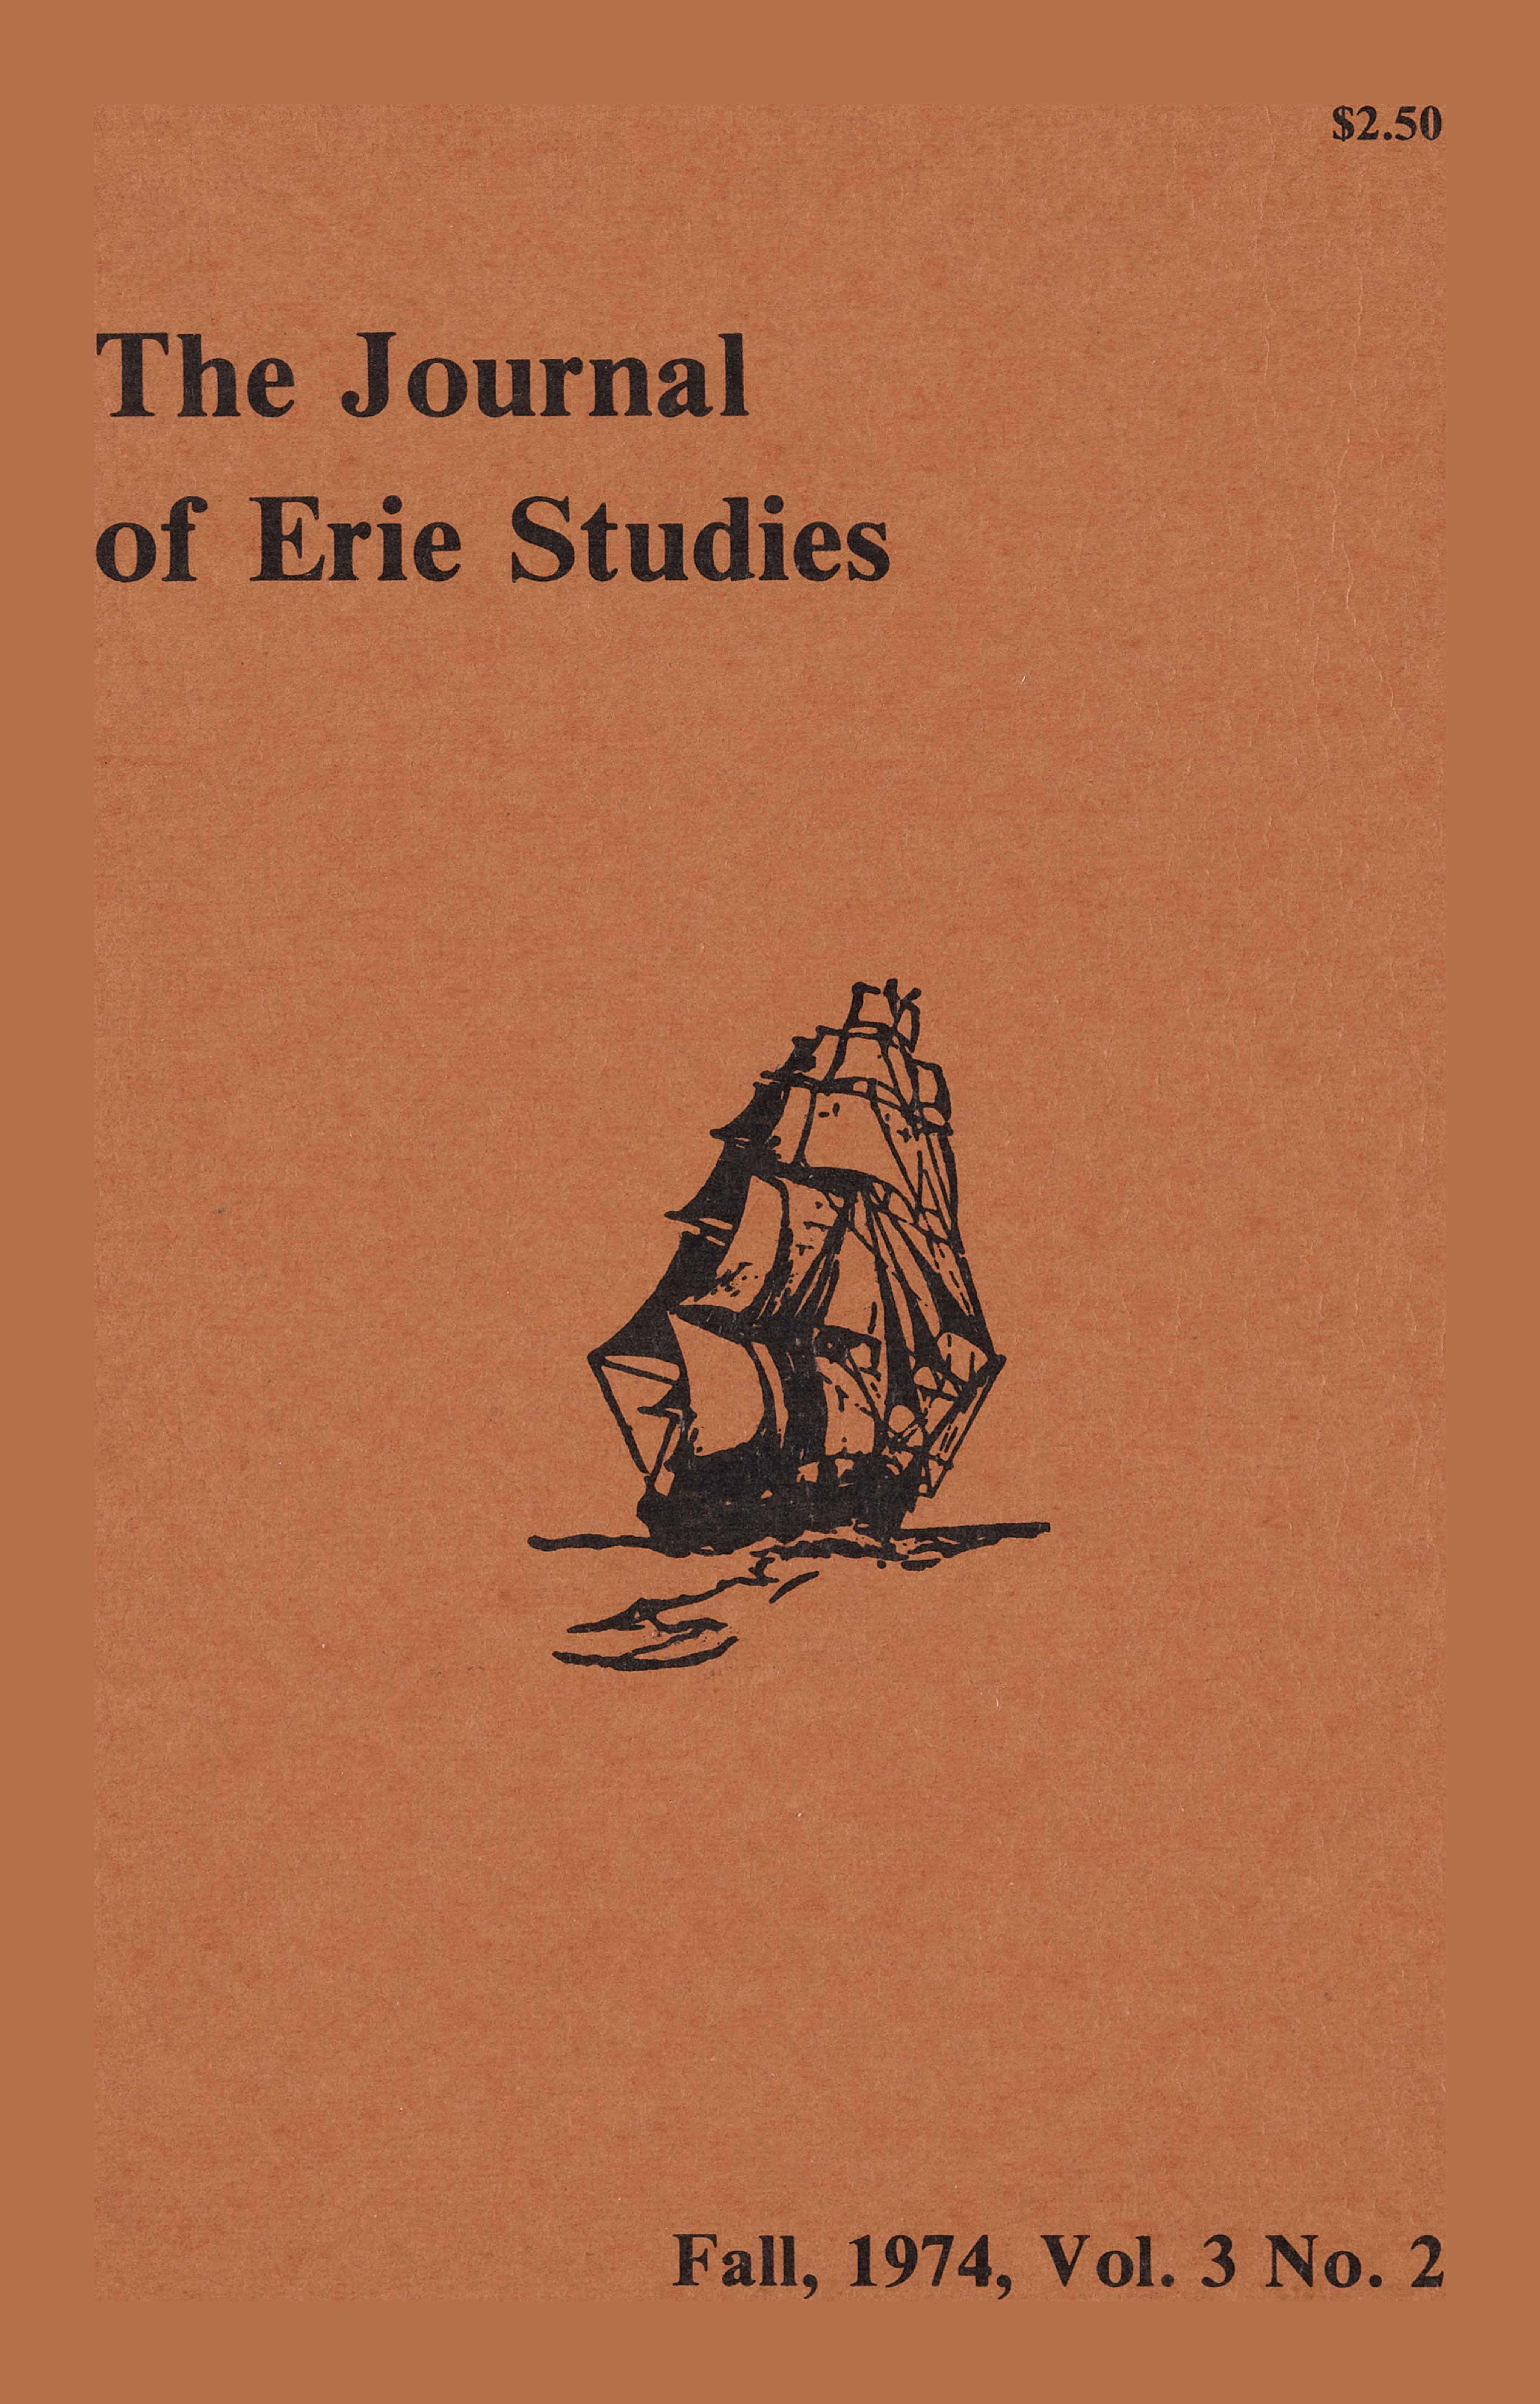 Sketch of ship with the text, "The Journal of Erie Studies, Fall, 1974, Vol. 3 No.2."